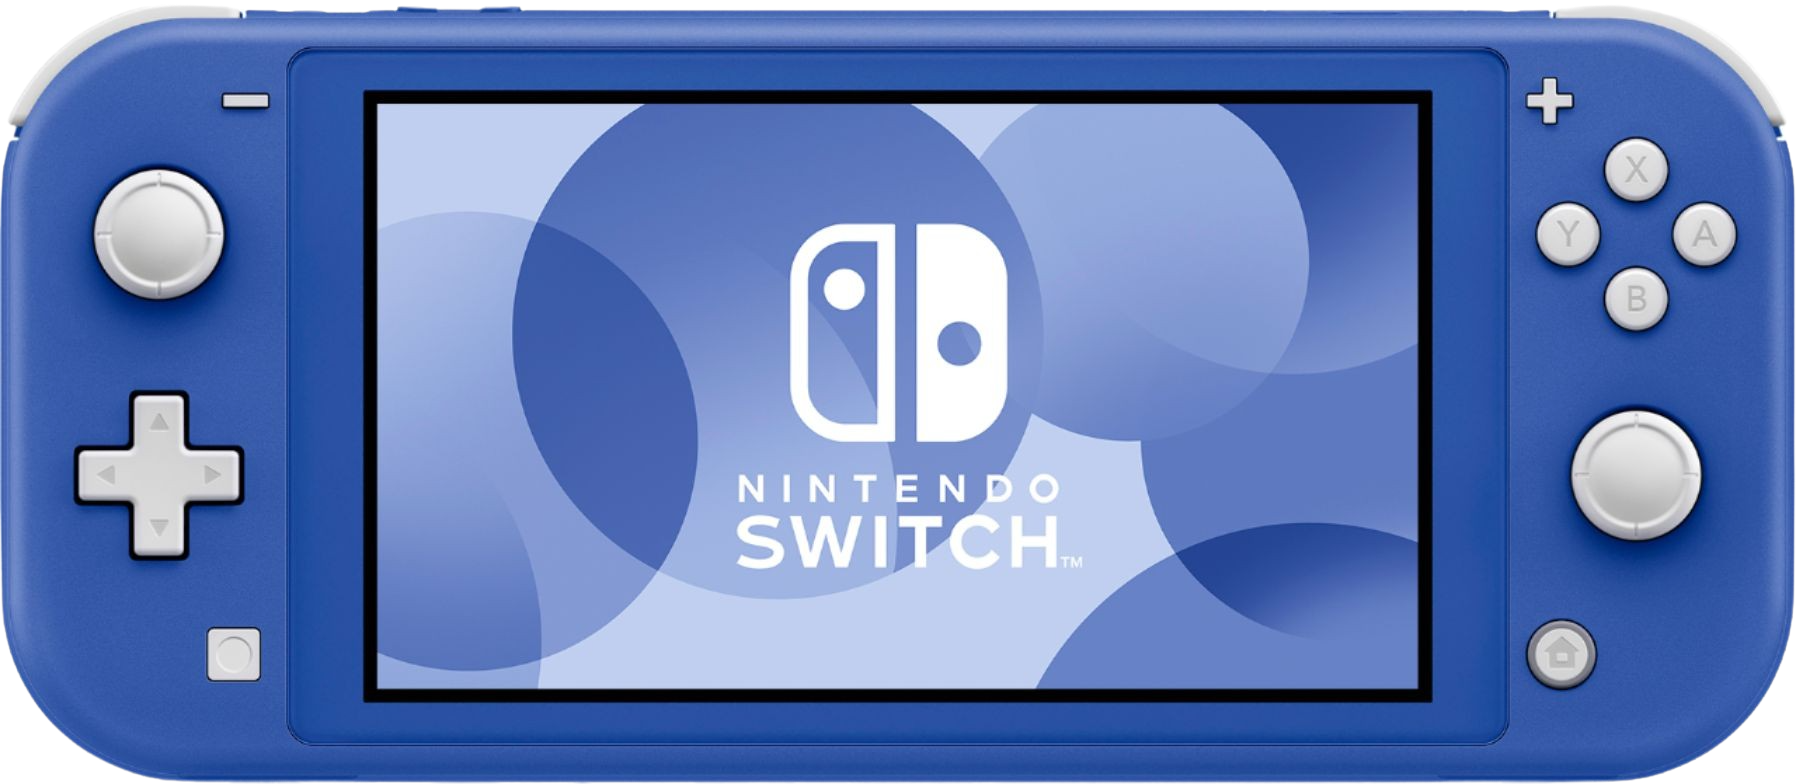 Rent Nintendo Switch Lite from $14.90 per month